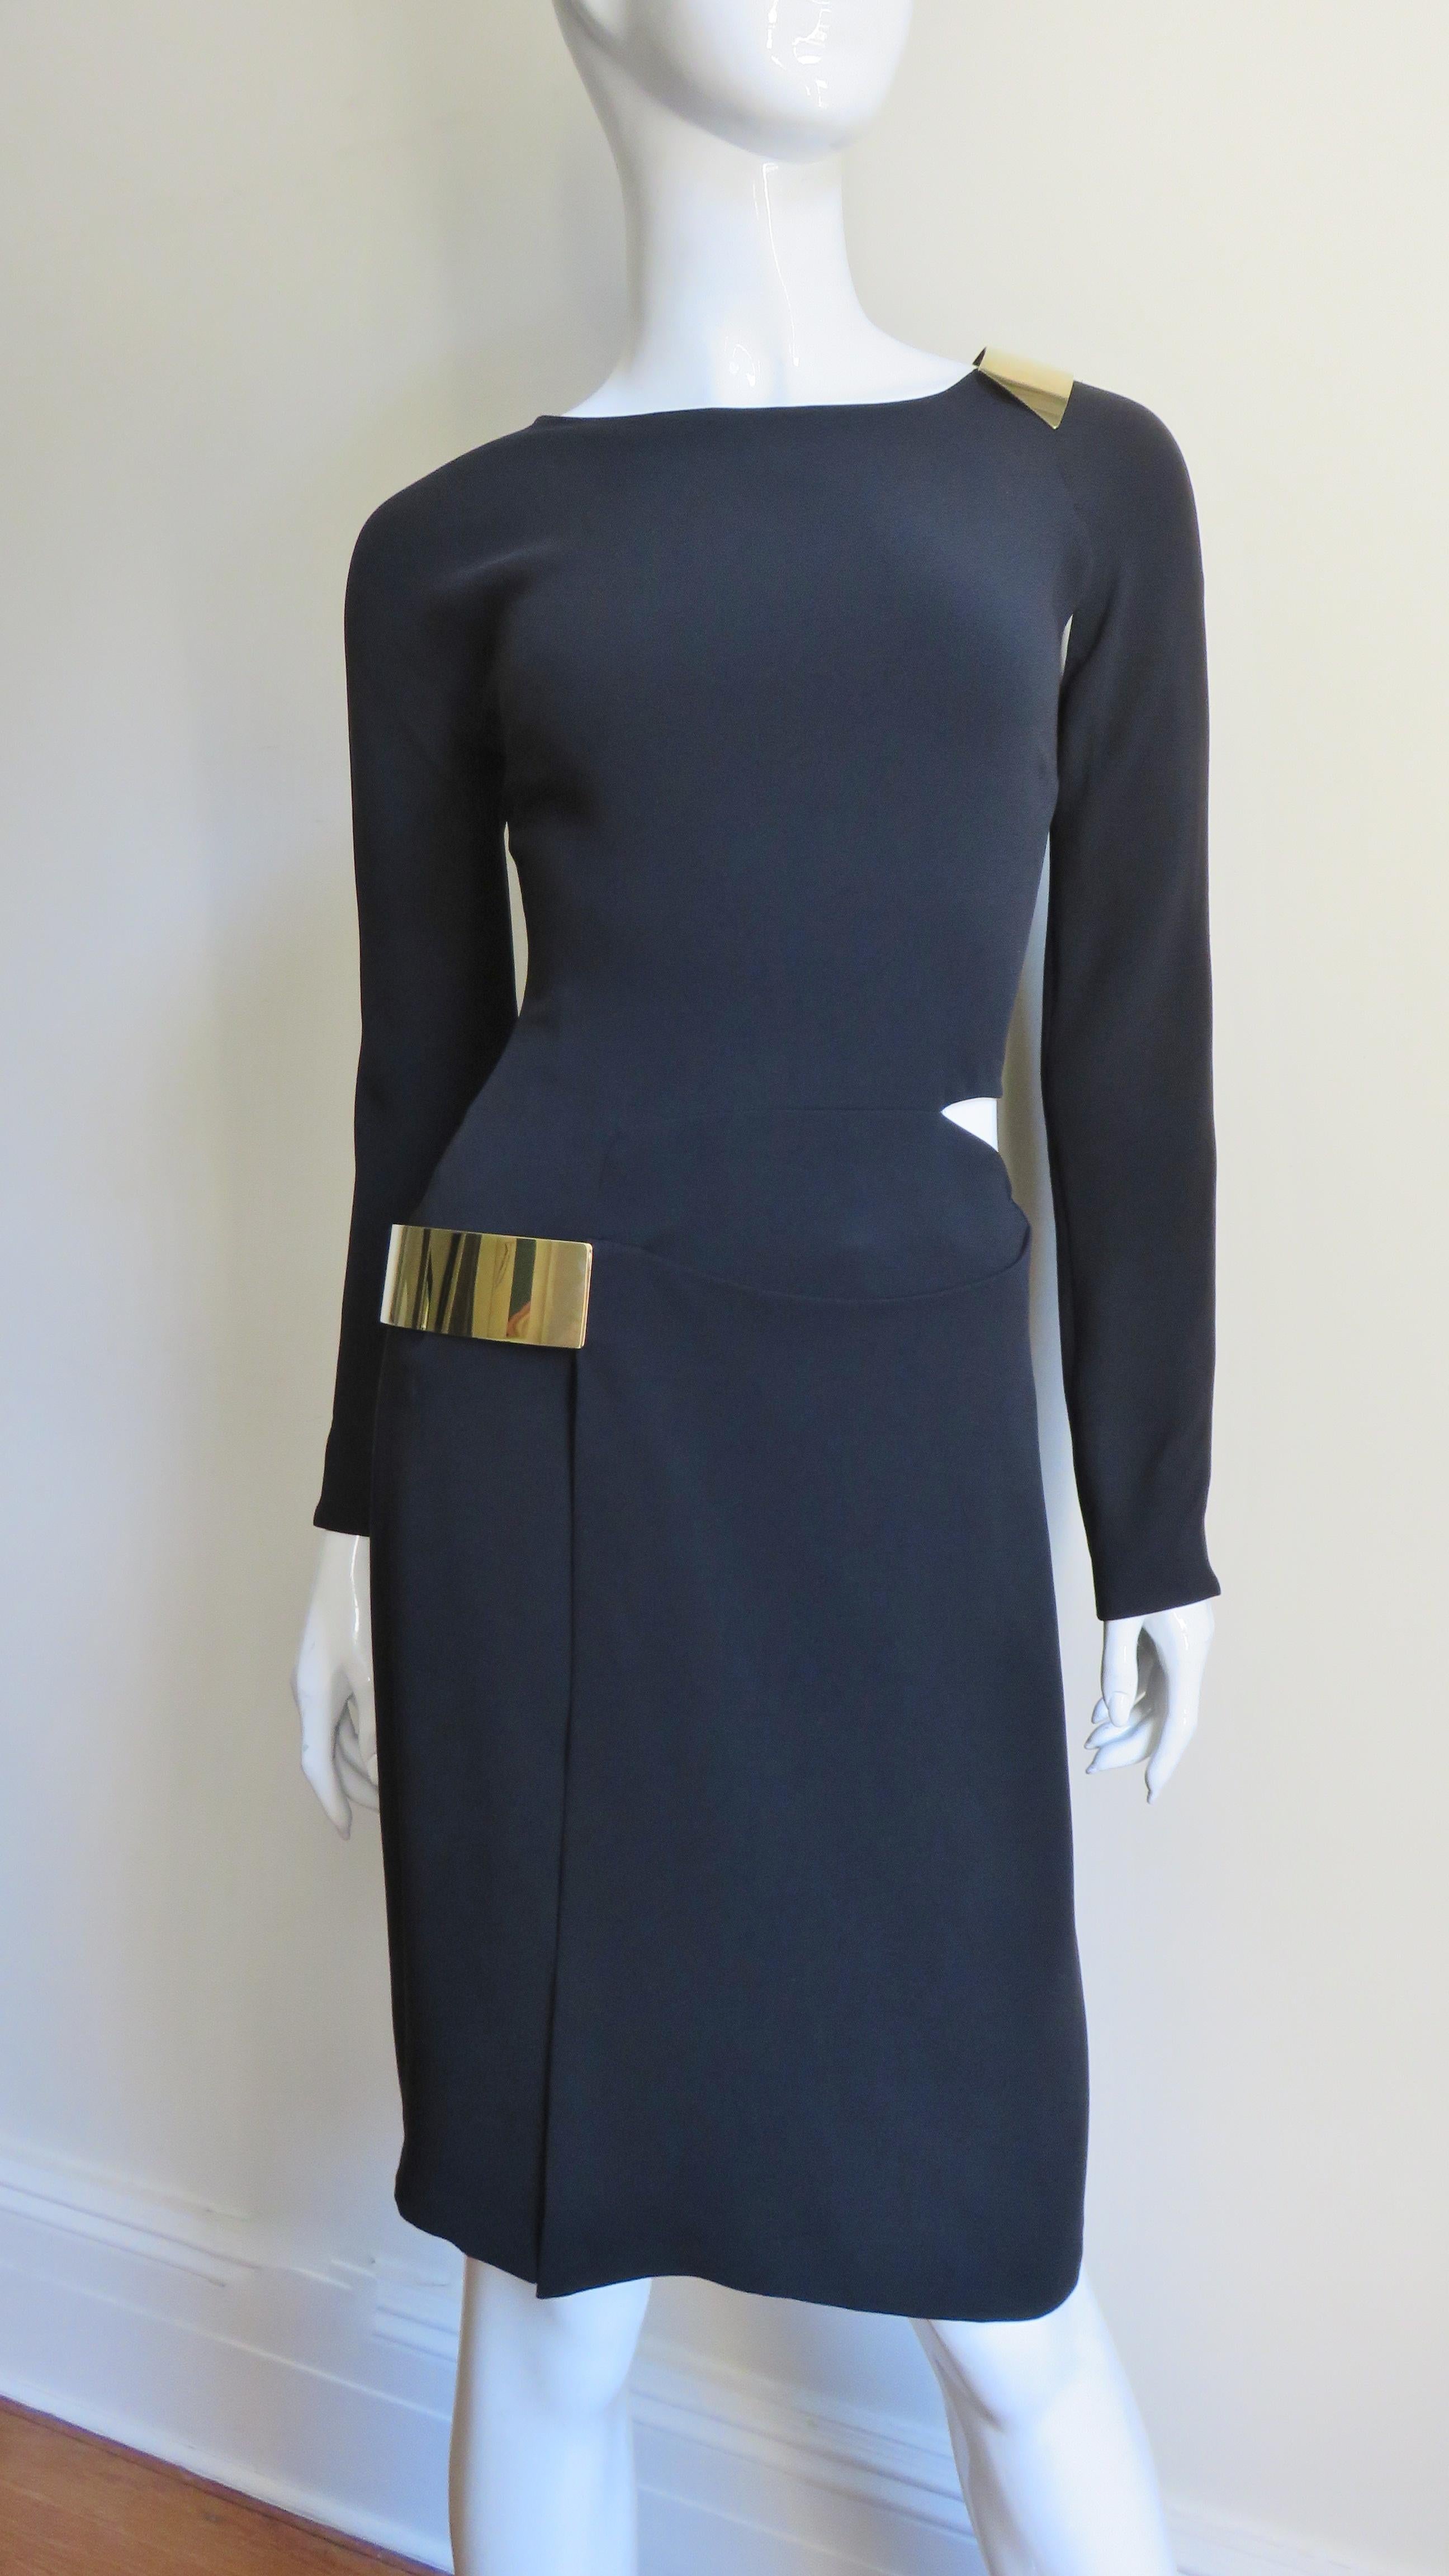 A fabulous black silk jersey dress from Gucci. It has a simple neckline, long zipper cuff sleeves and cut outs at a shoulder and side waist plus a front slit in the straight skirt. The skirt slit and shoulder cut out are highlighted with gold metal